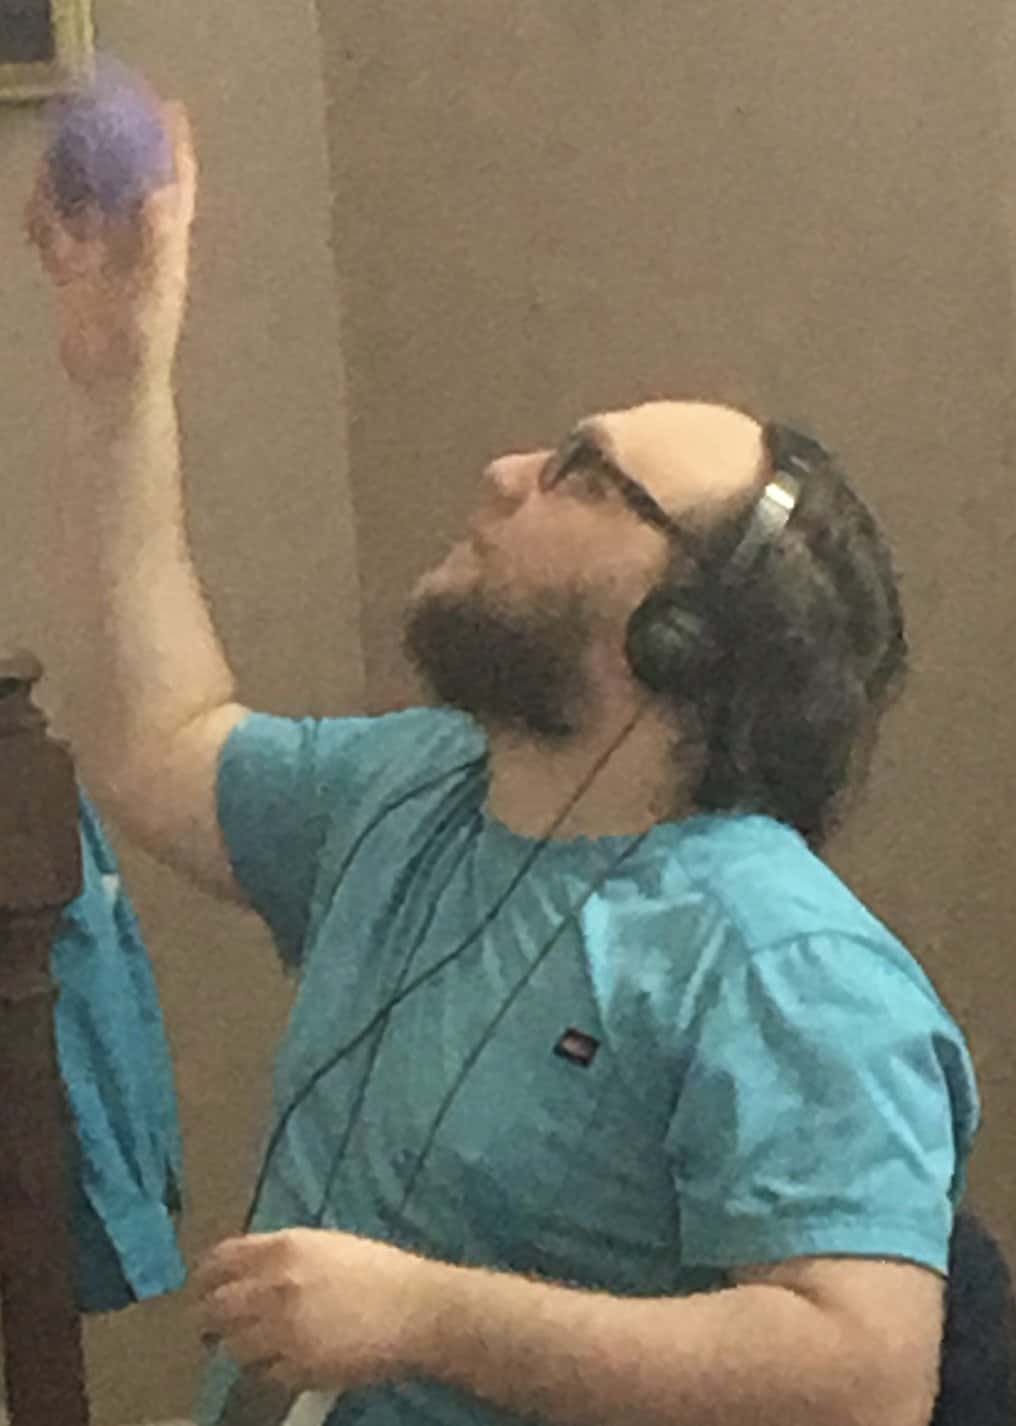 Young man wearing headphones listening to therapeutic music while tossing a stress ball up into the air.